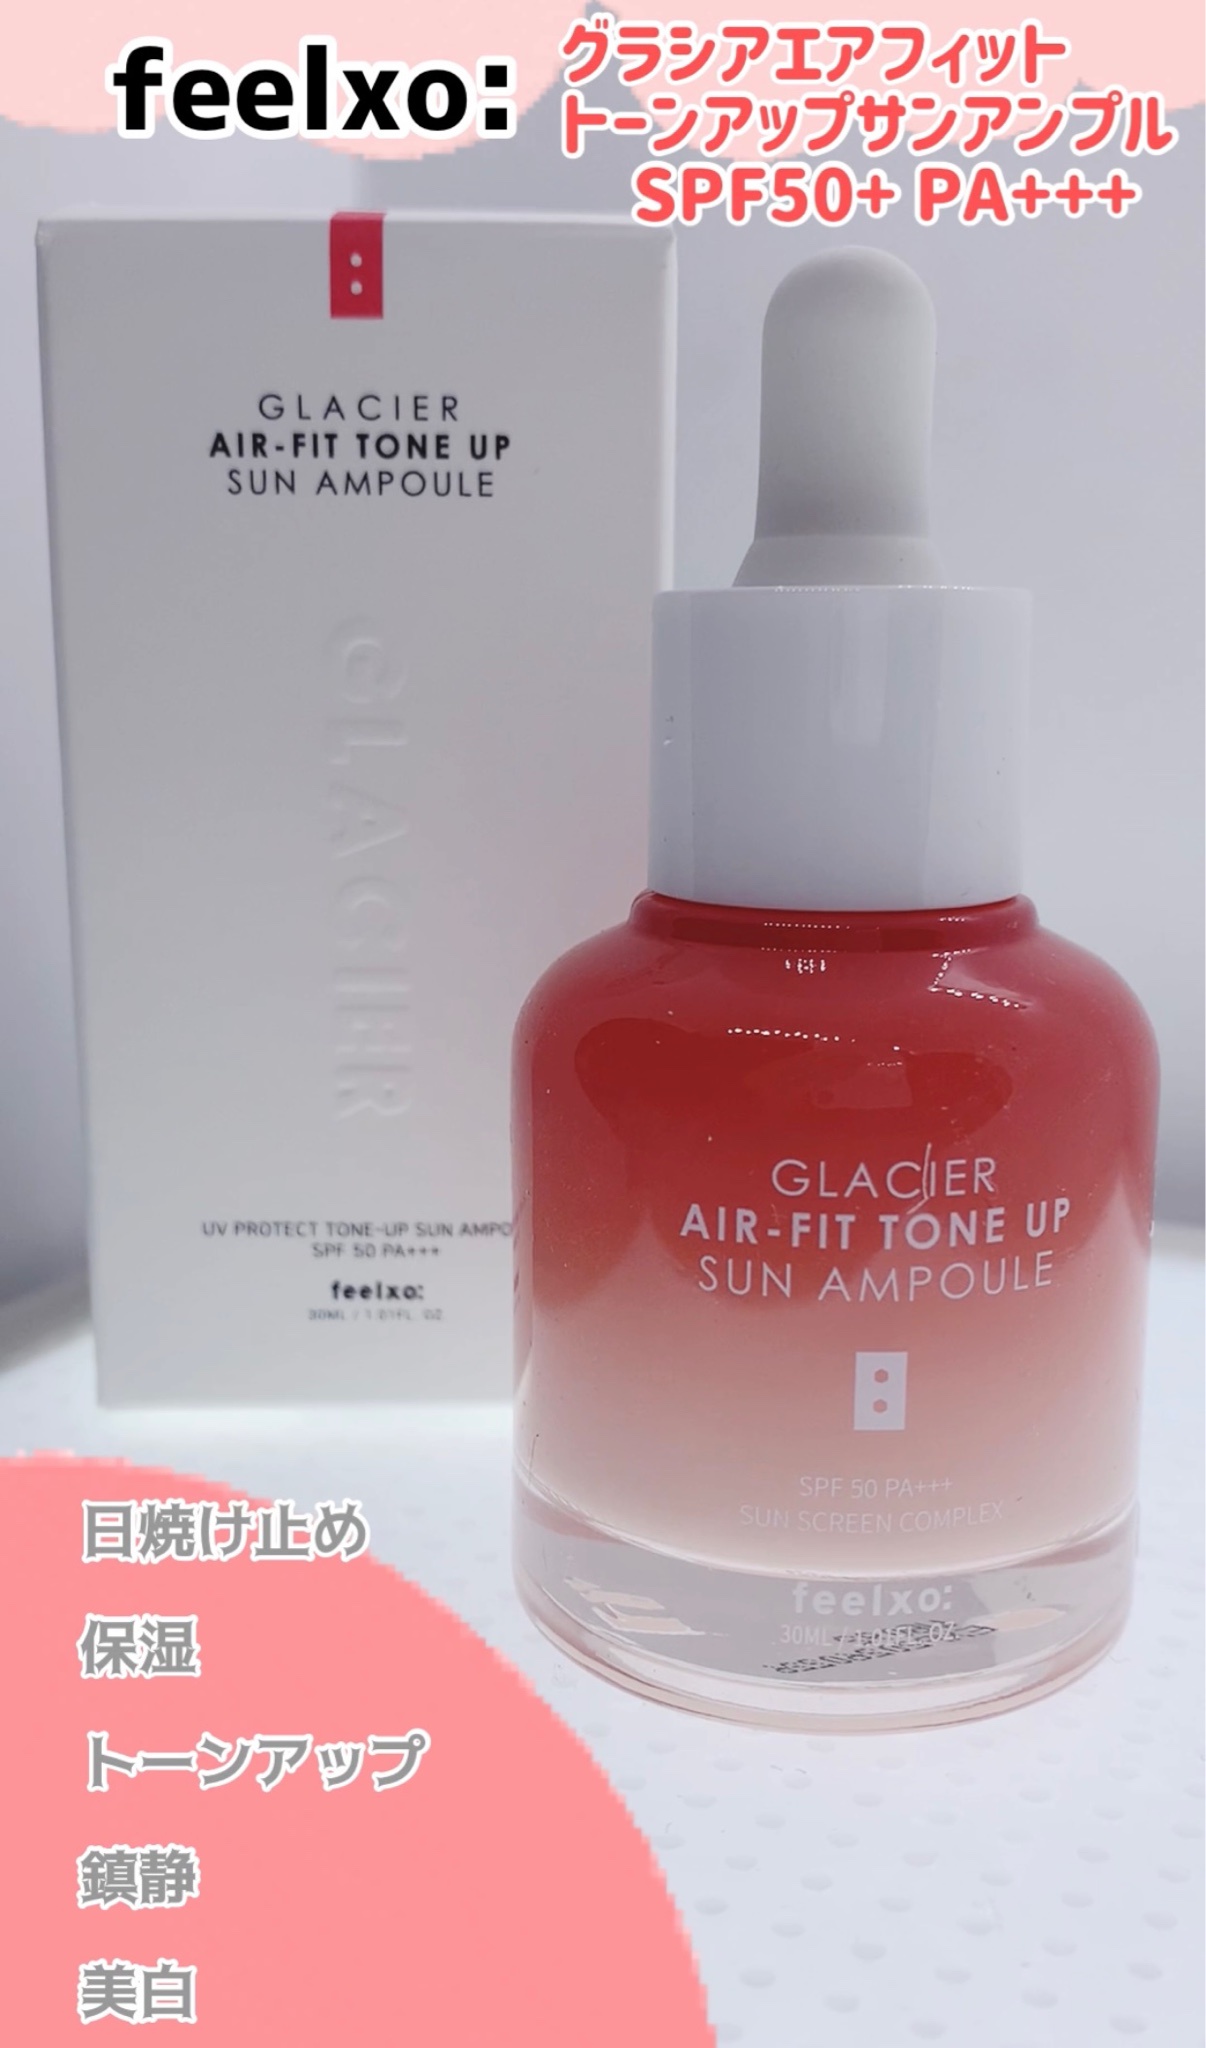 feelxo / Glacier air fit Tone up Sun Ampouleの口コミ写真（by  eunhappleさん）｜美容・化粧品情報はアットコスメ